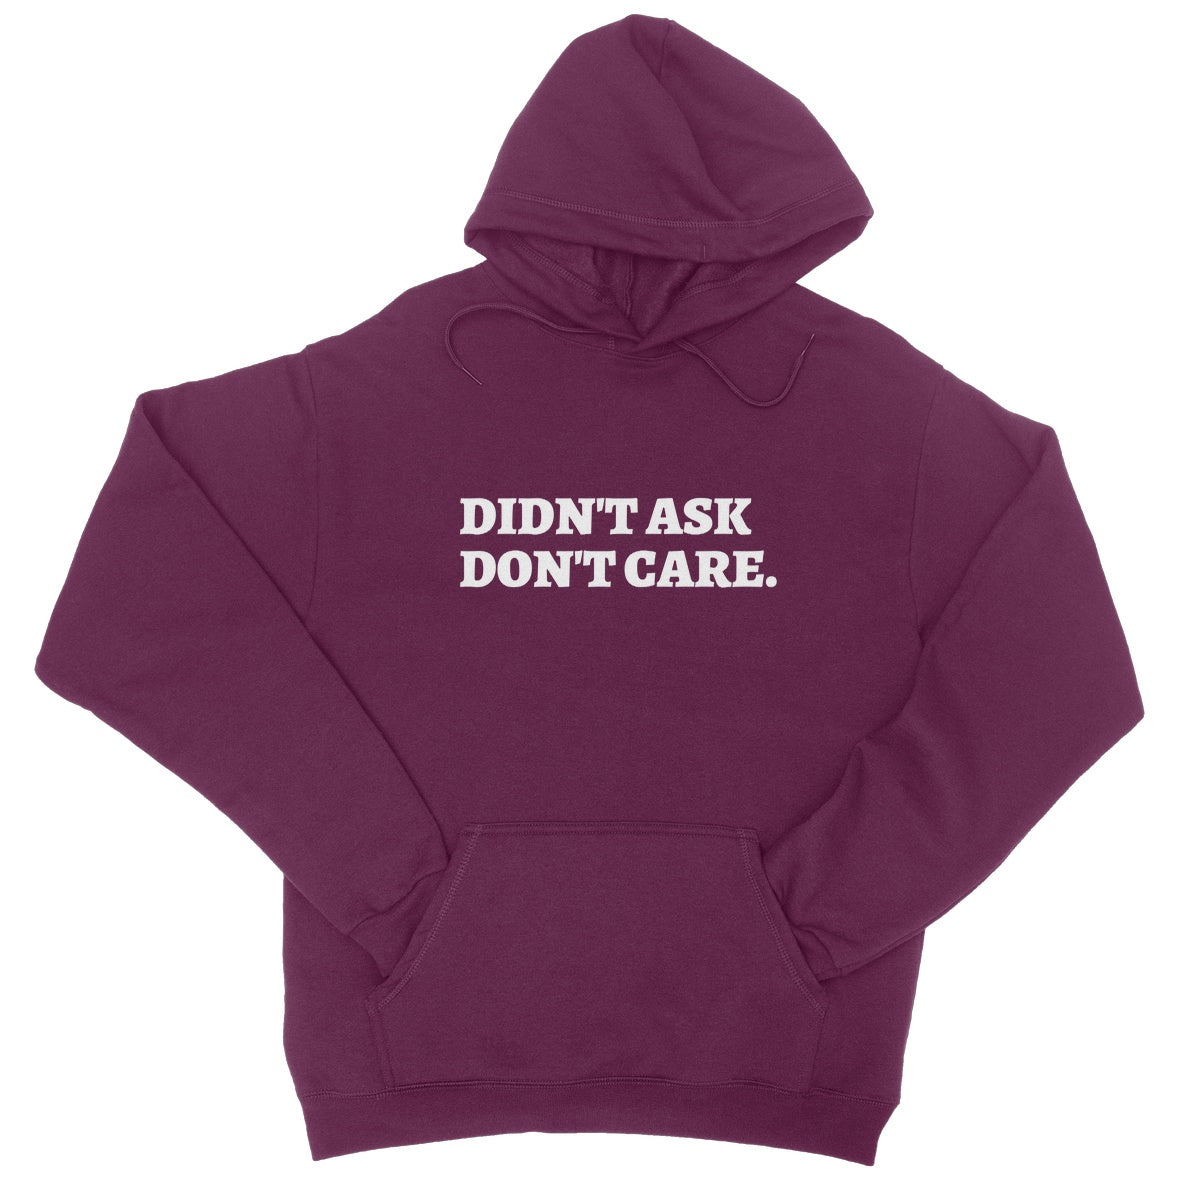 did not ask do not care hoodie purple